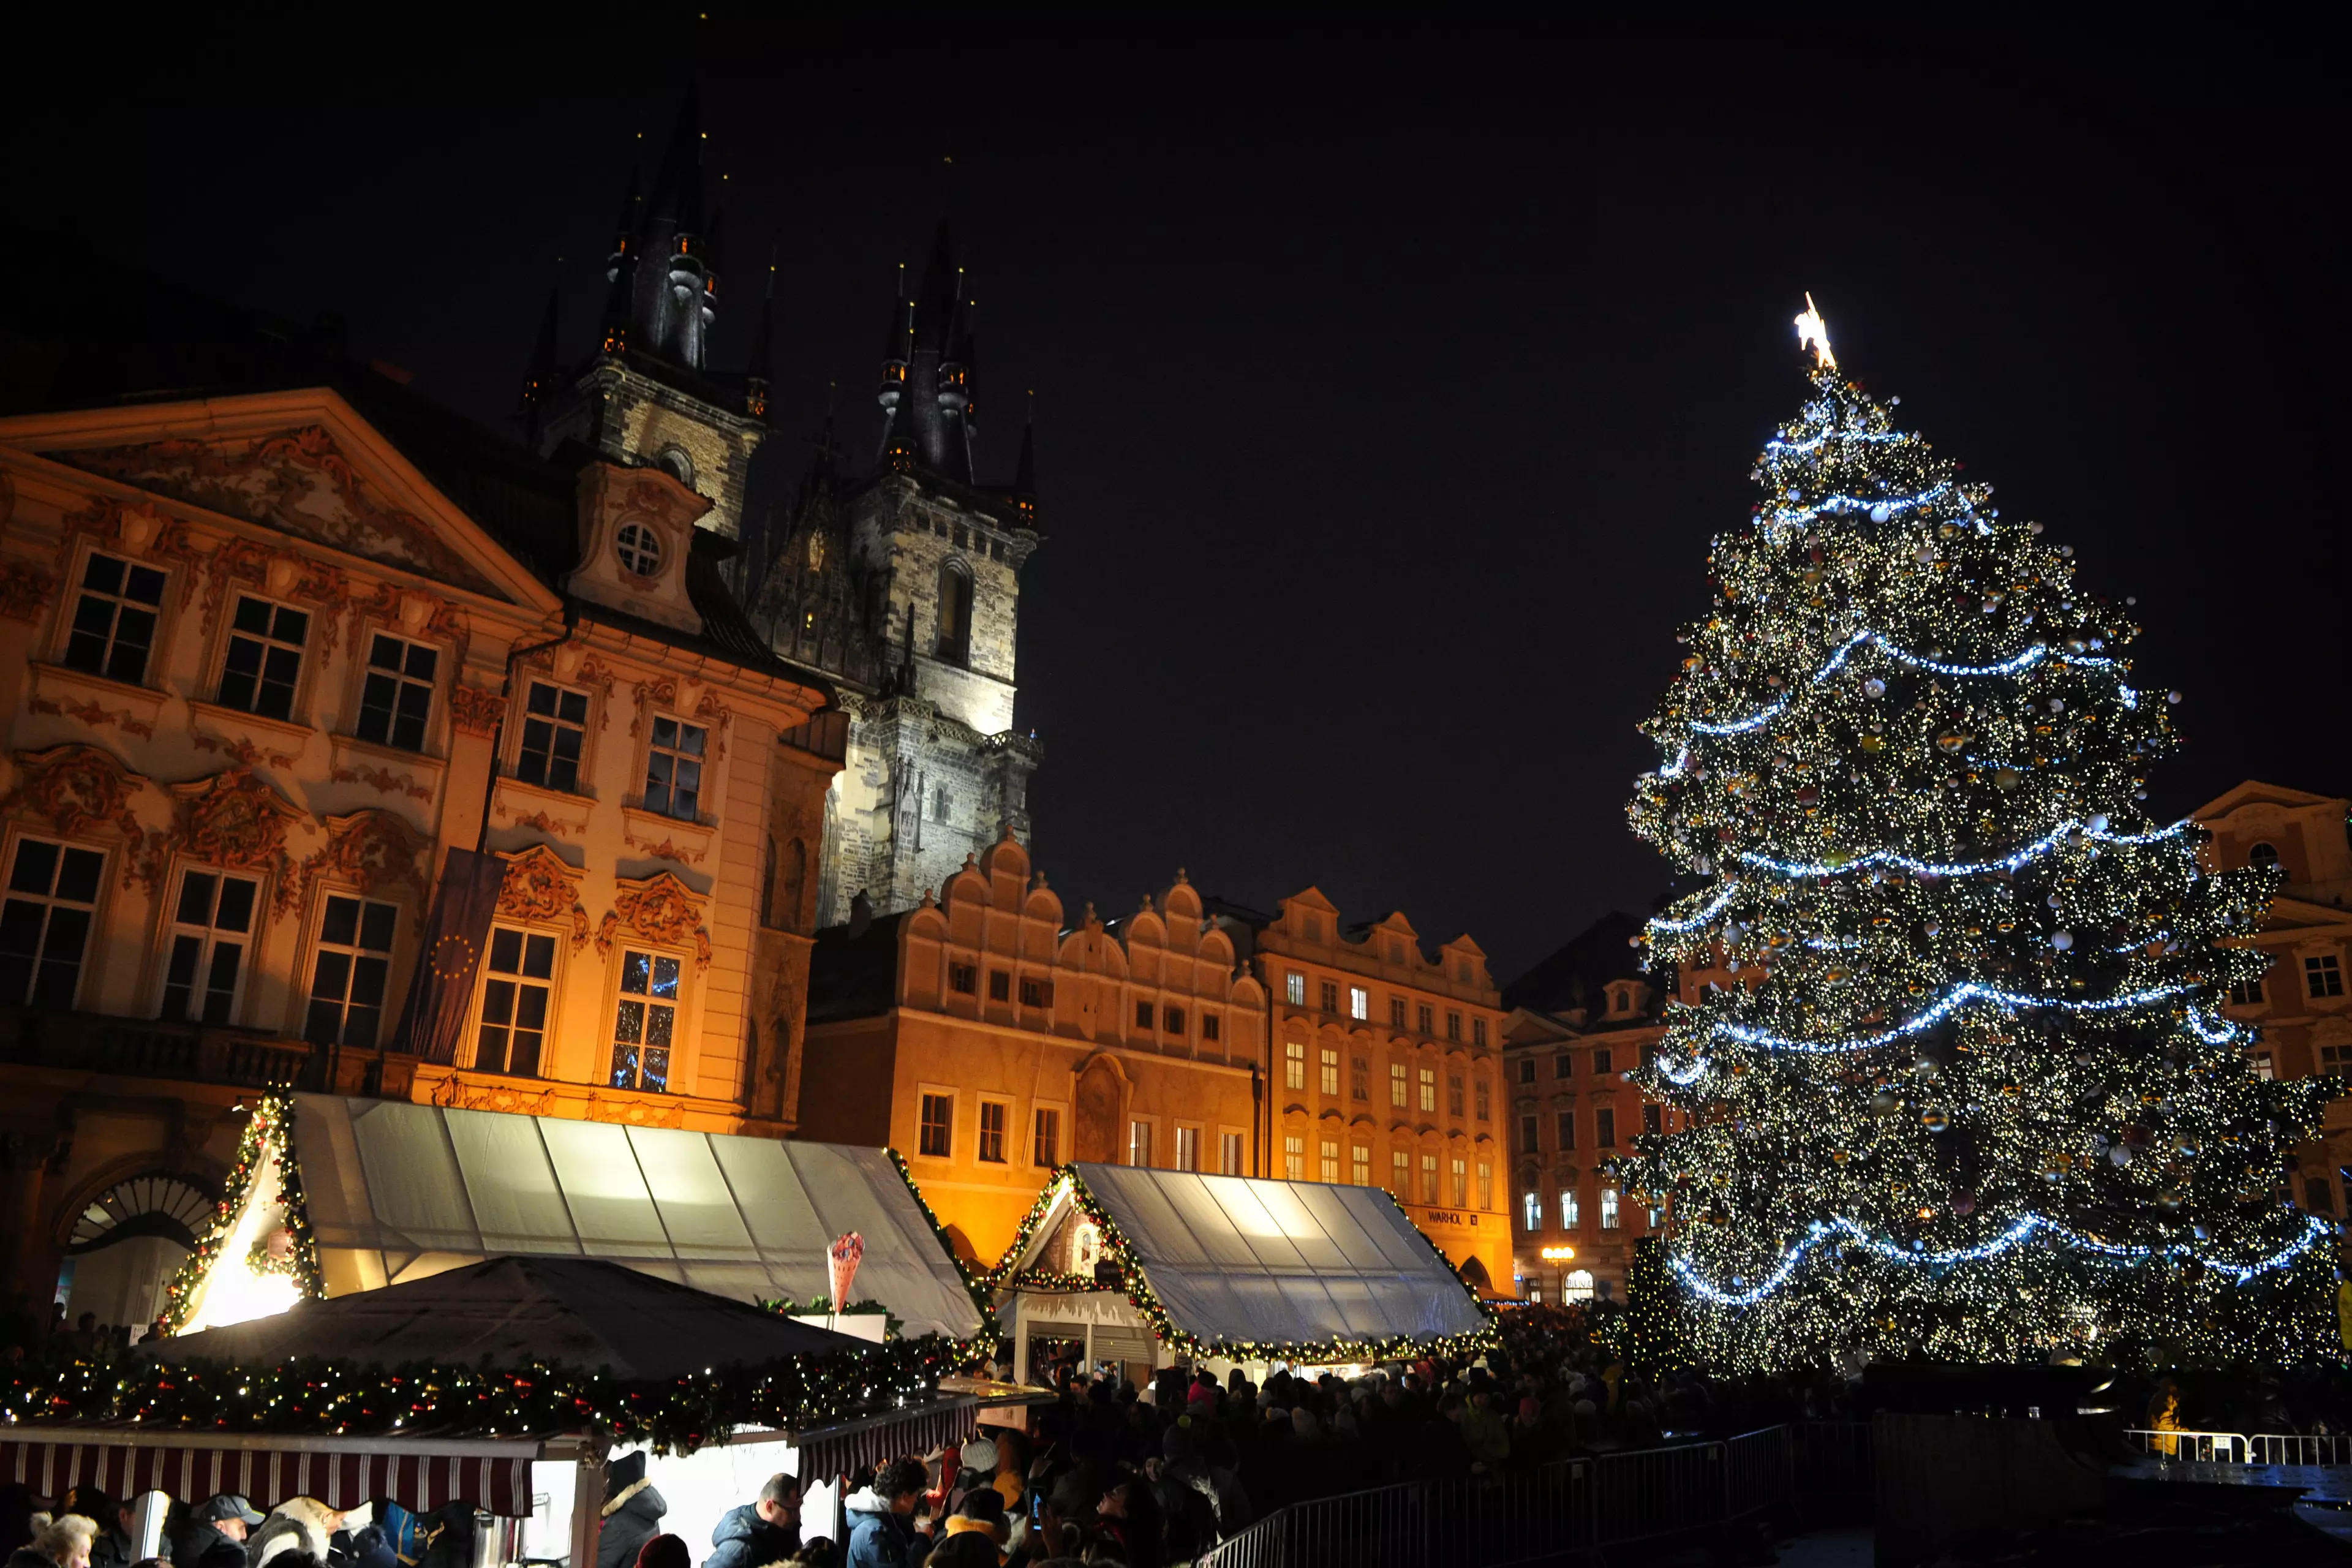 Prague Christmas Market features a massive tree draped in lights